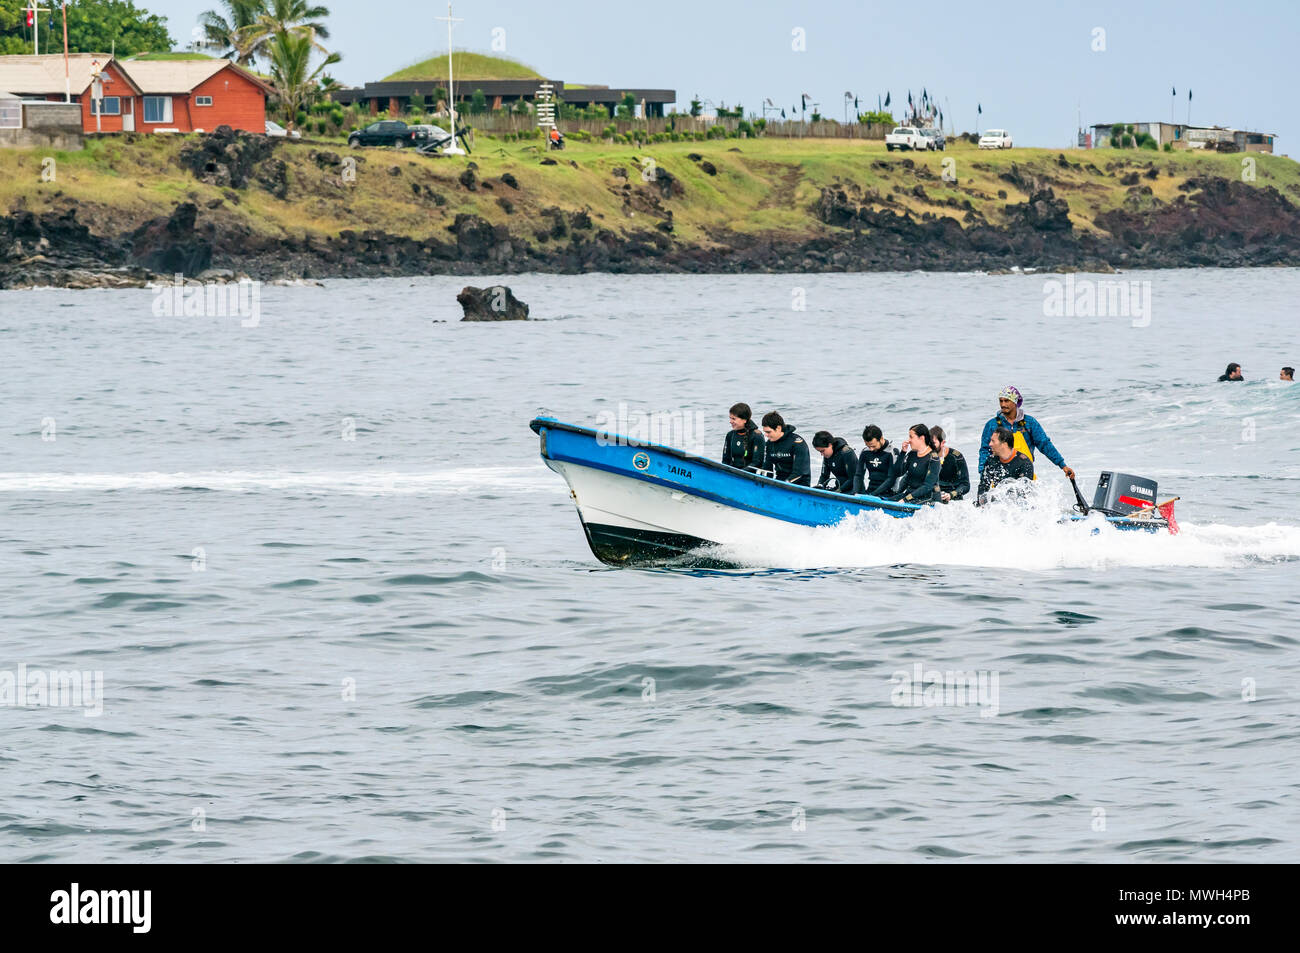 Small open boat with outboard motor bringing back divers in wetsuits after a dive, Hanga Roa, Easter Island, Rapa Nui, Chile Stock Photo